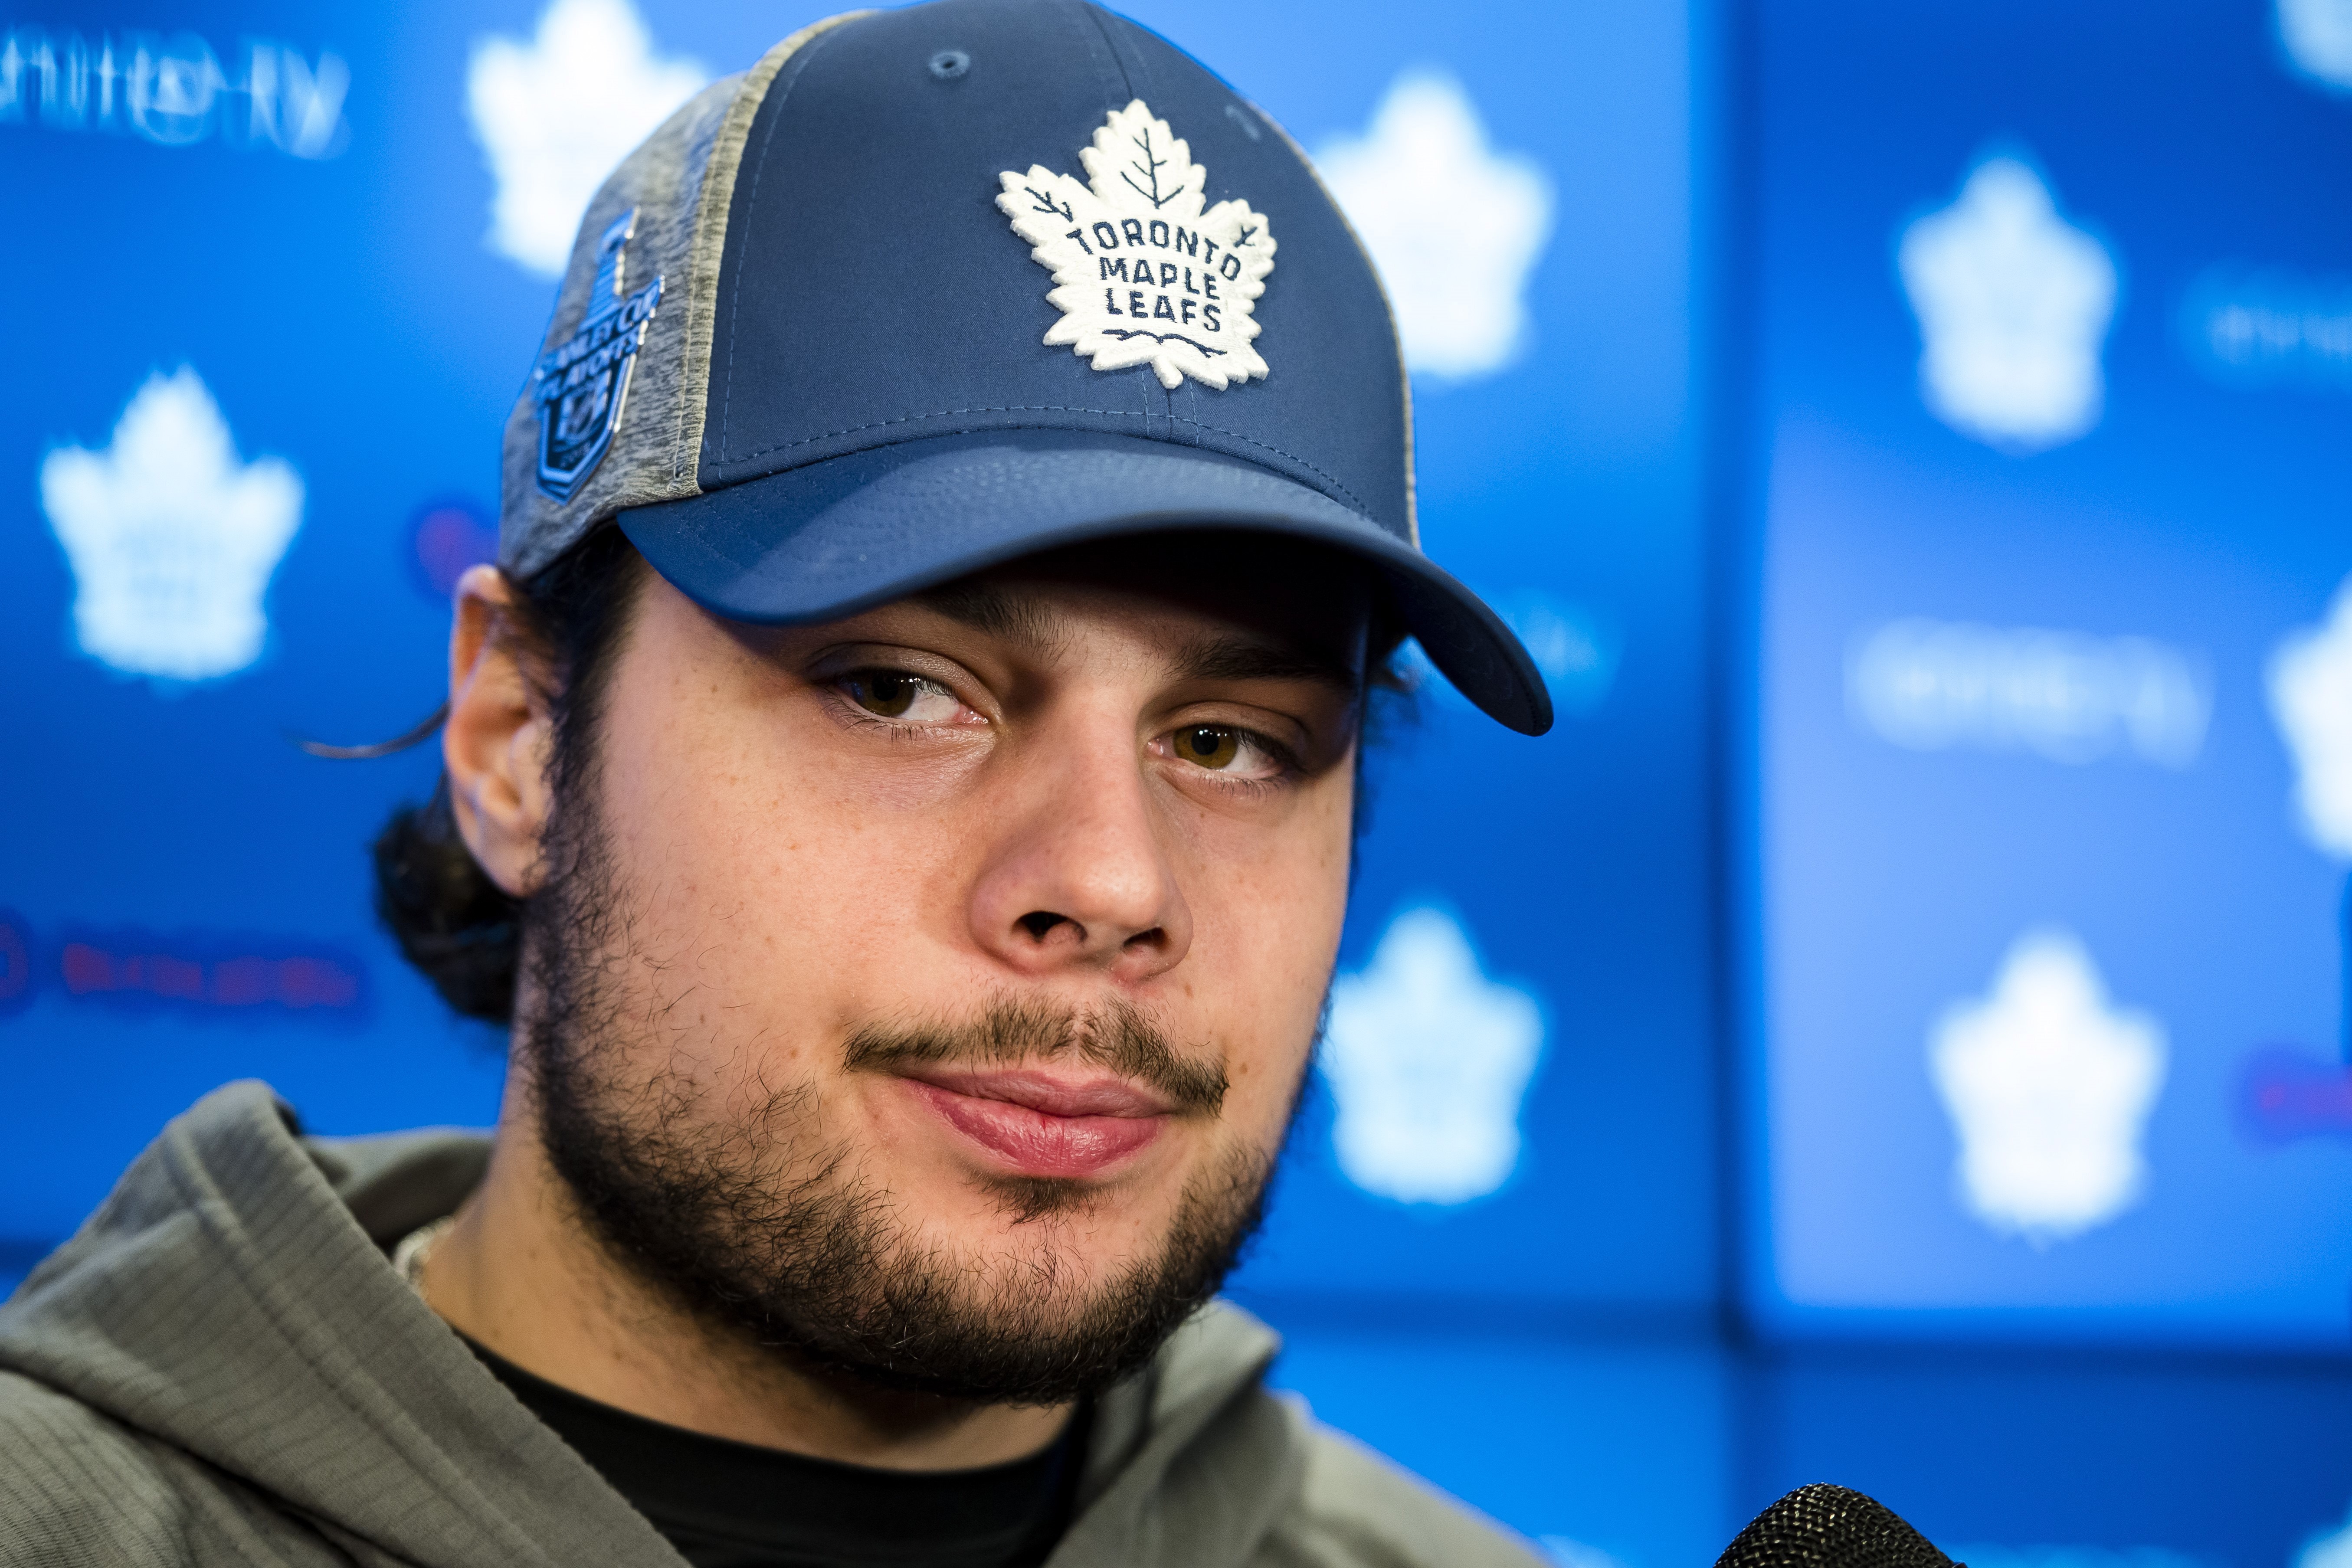 Auston Matthews: Leafs star's bad behavior shows he's not ready for C